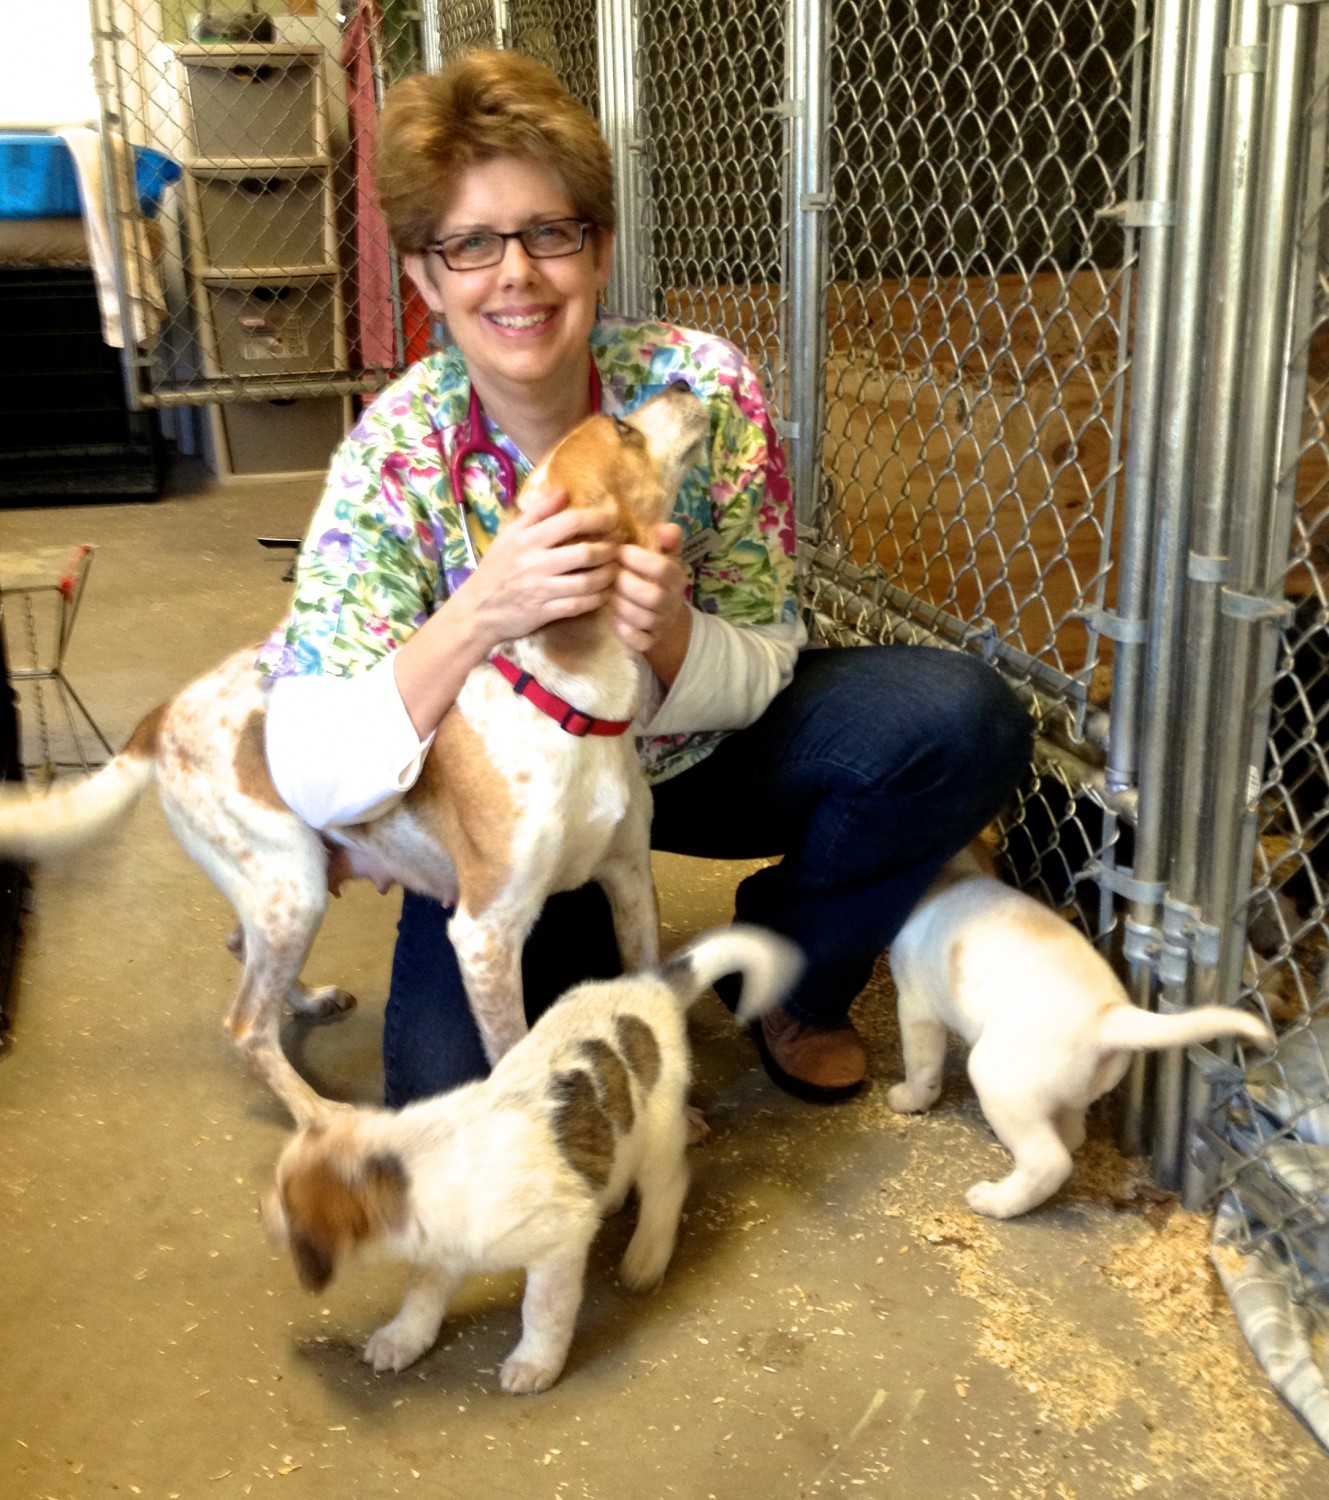 Dr. Peterson examines mom and pups at a local dog shelter